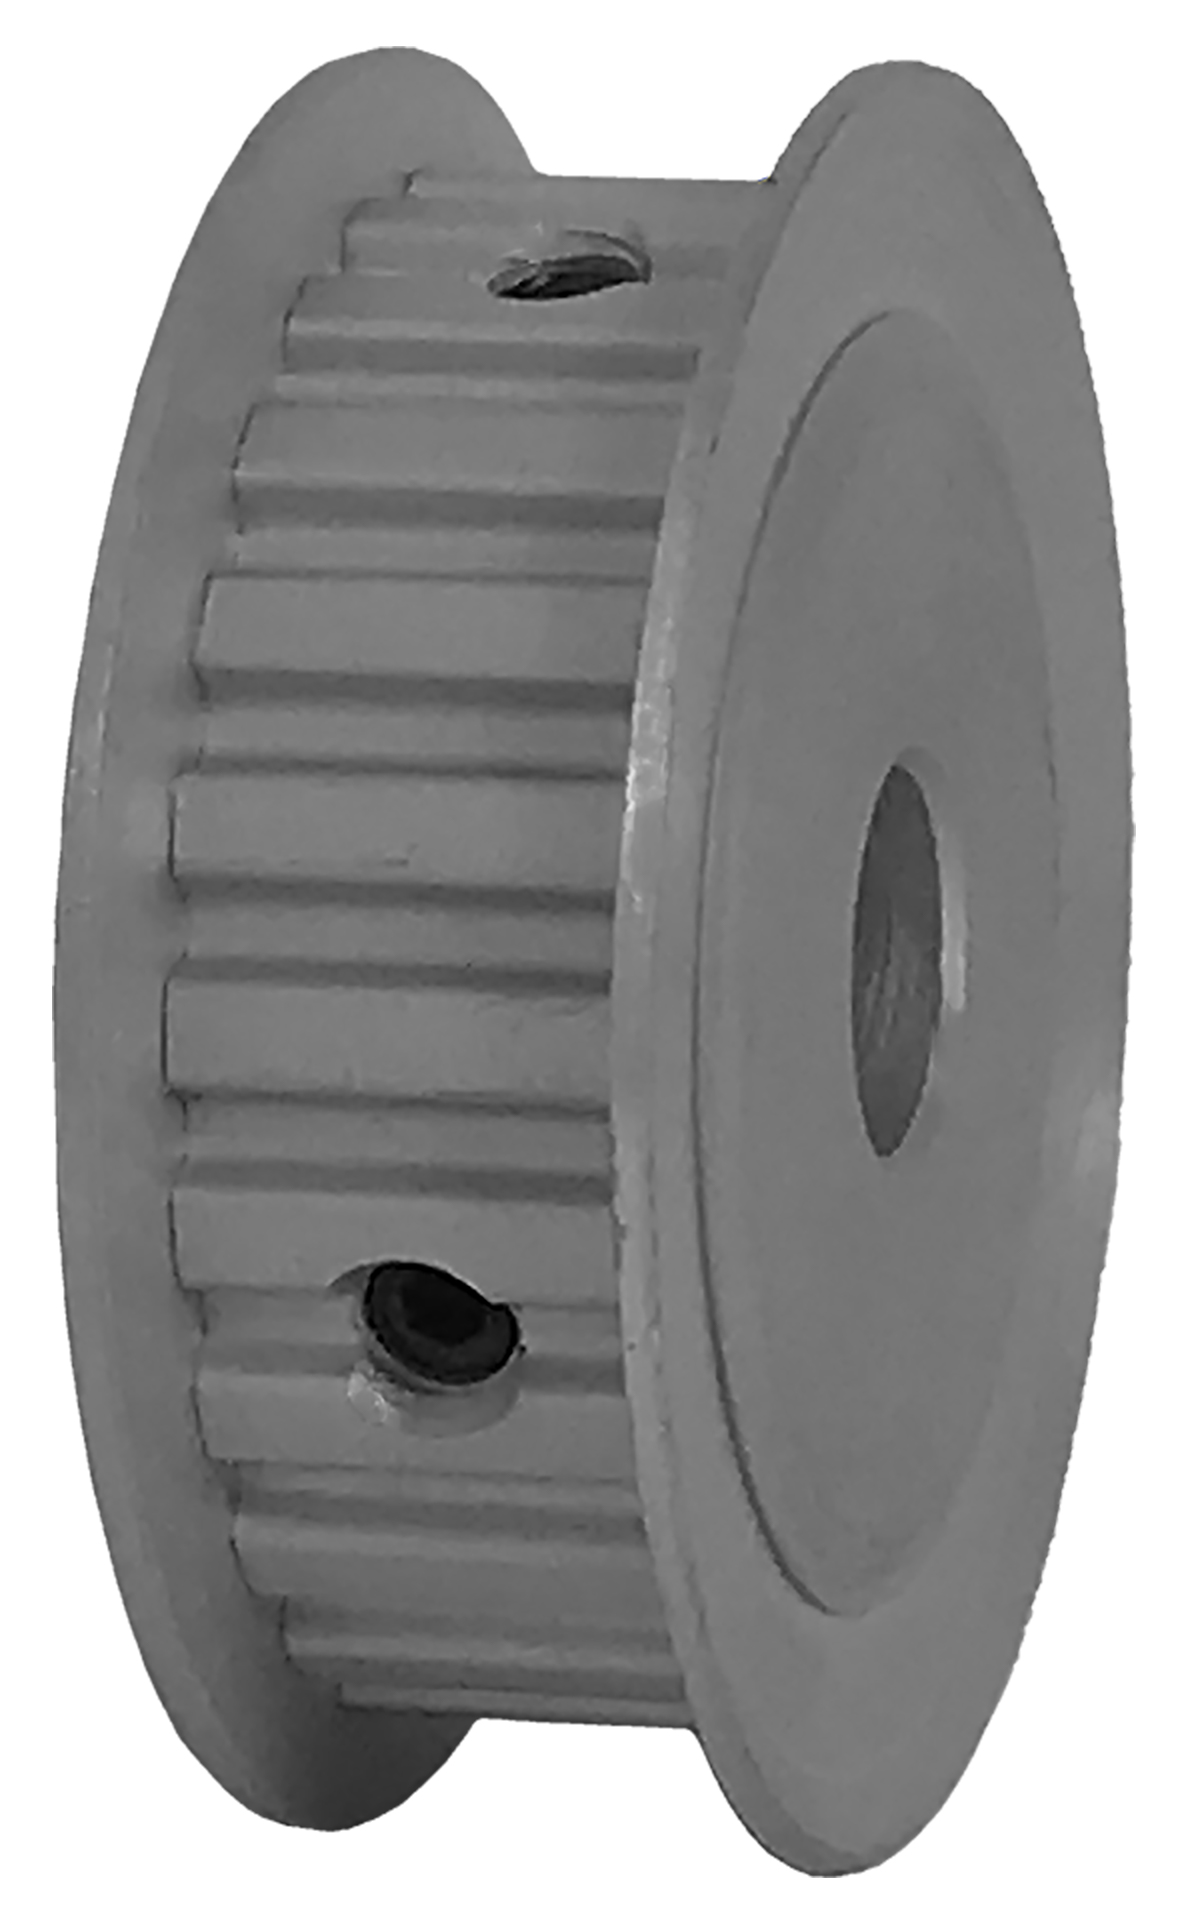 24XL037-3FA5 - Aluminum Imperial Pitch Pulleys